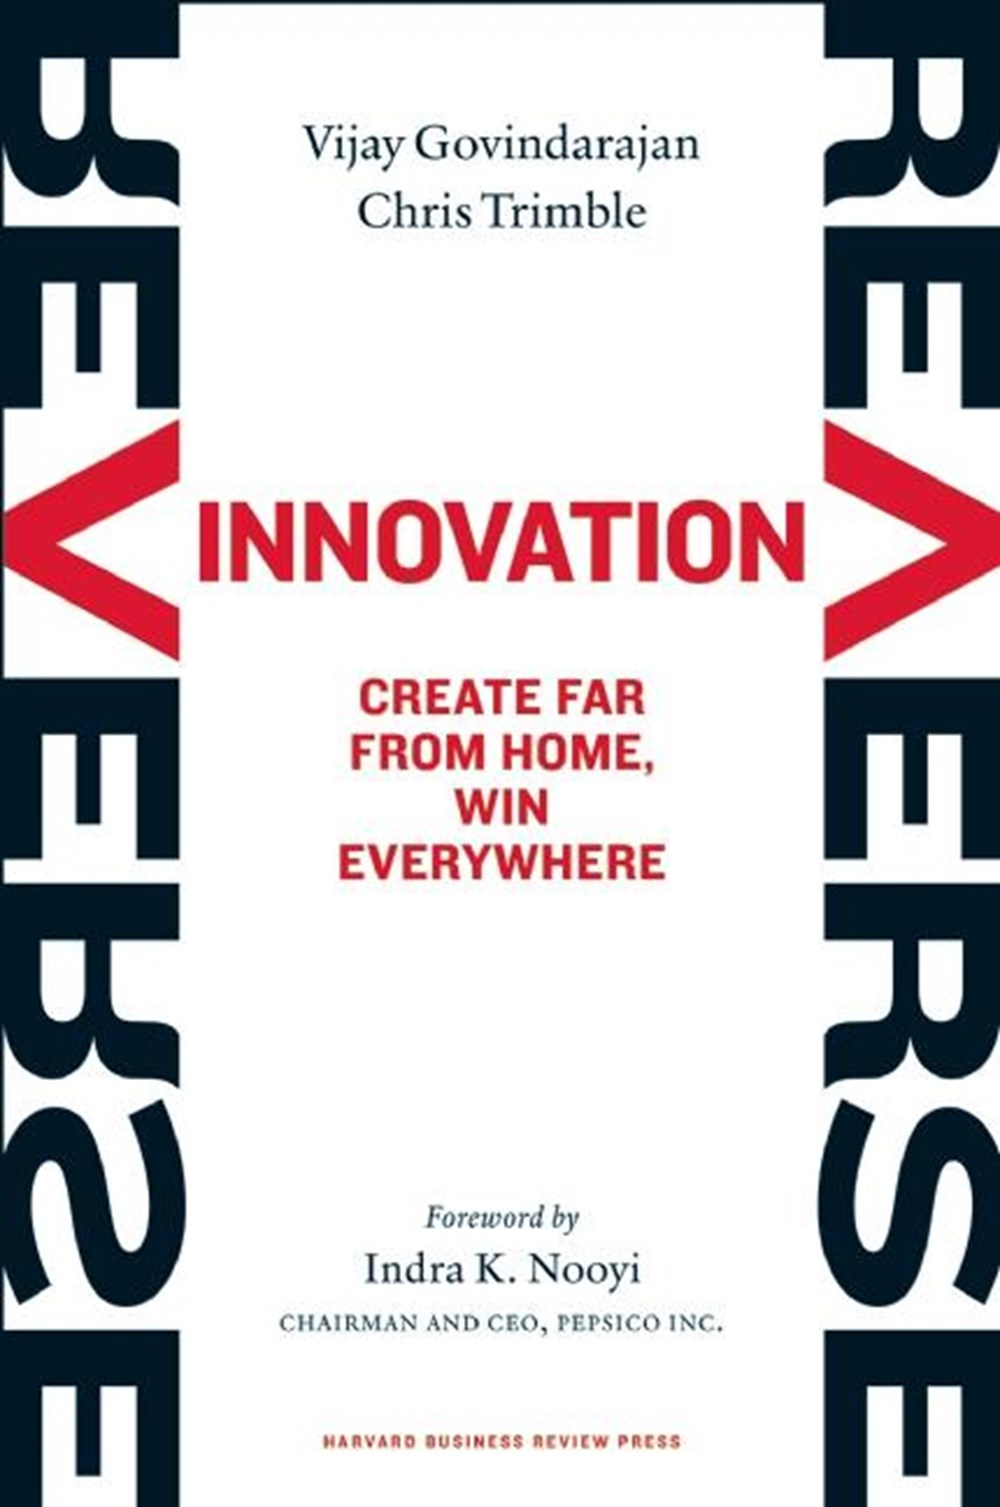 Reverse Innovation Create Far from Home, Win Everywhere